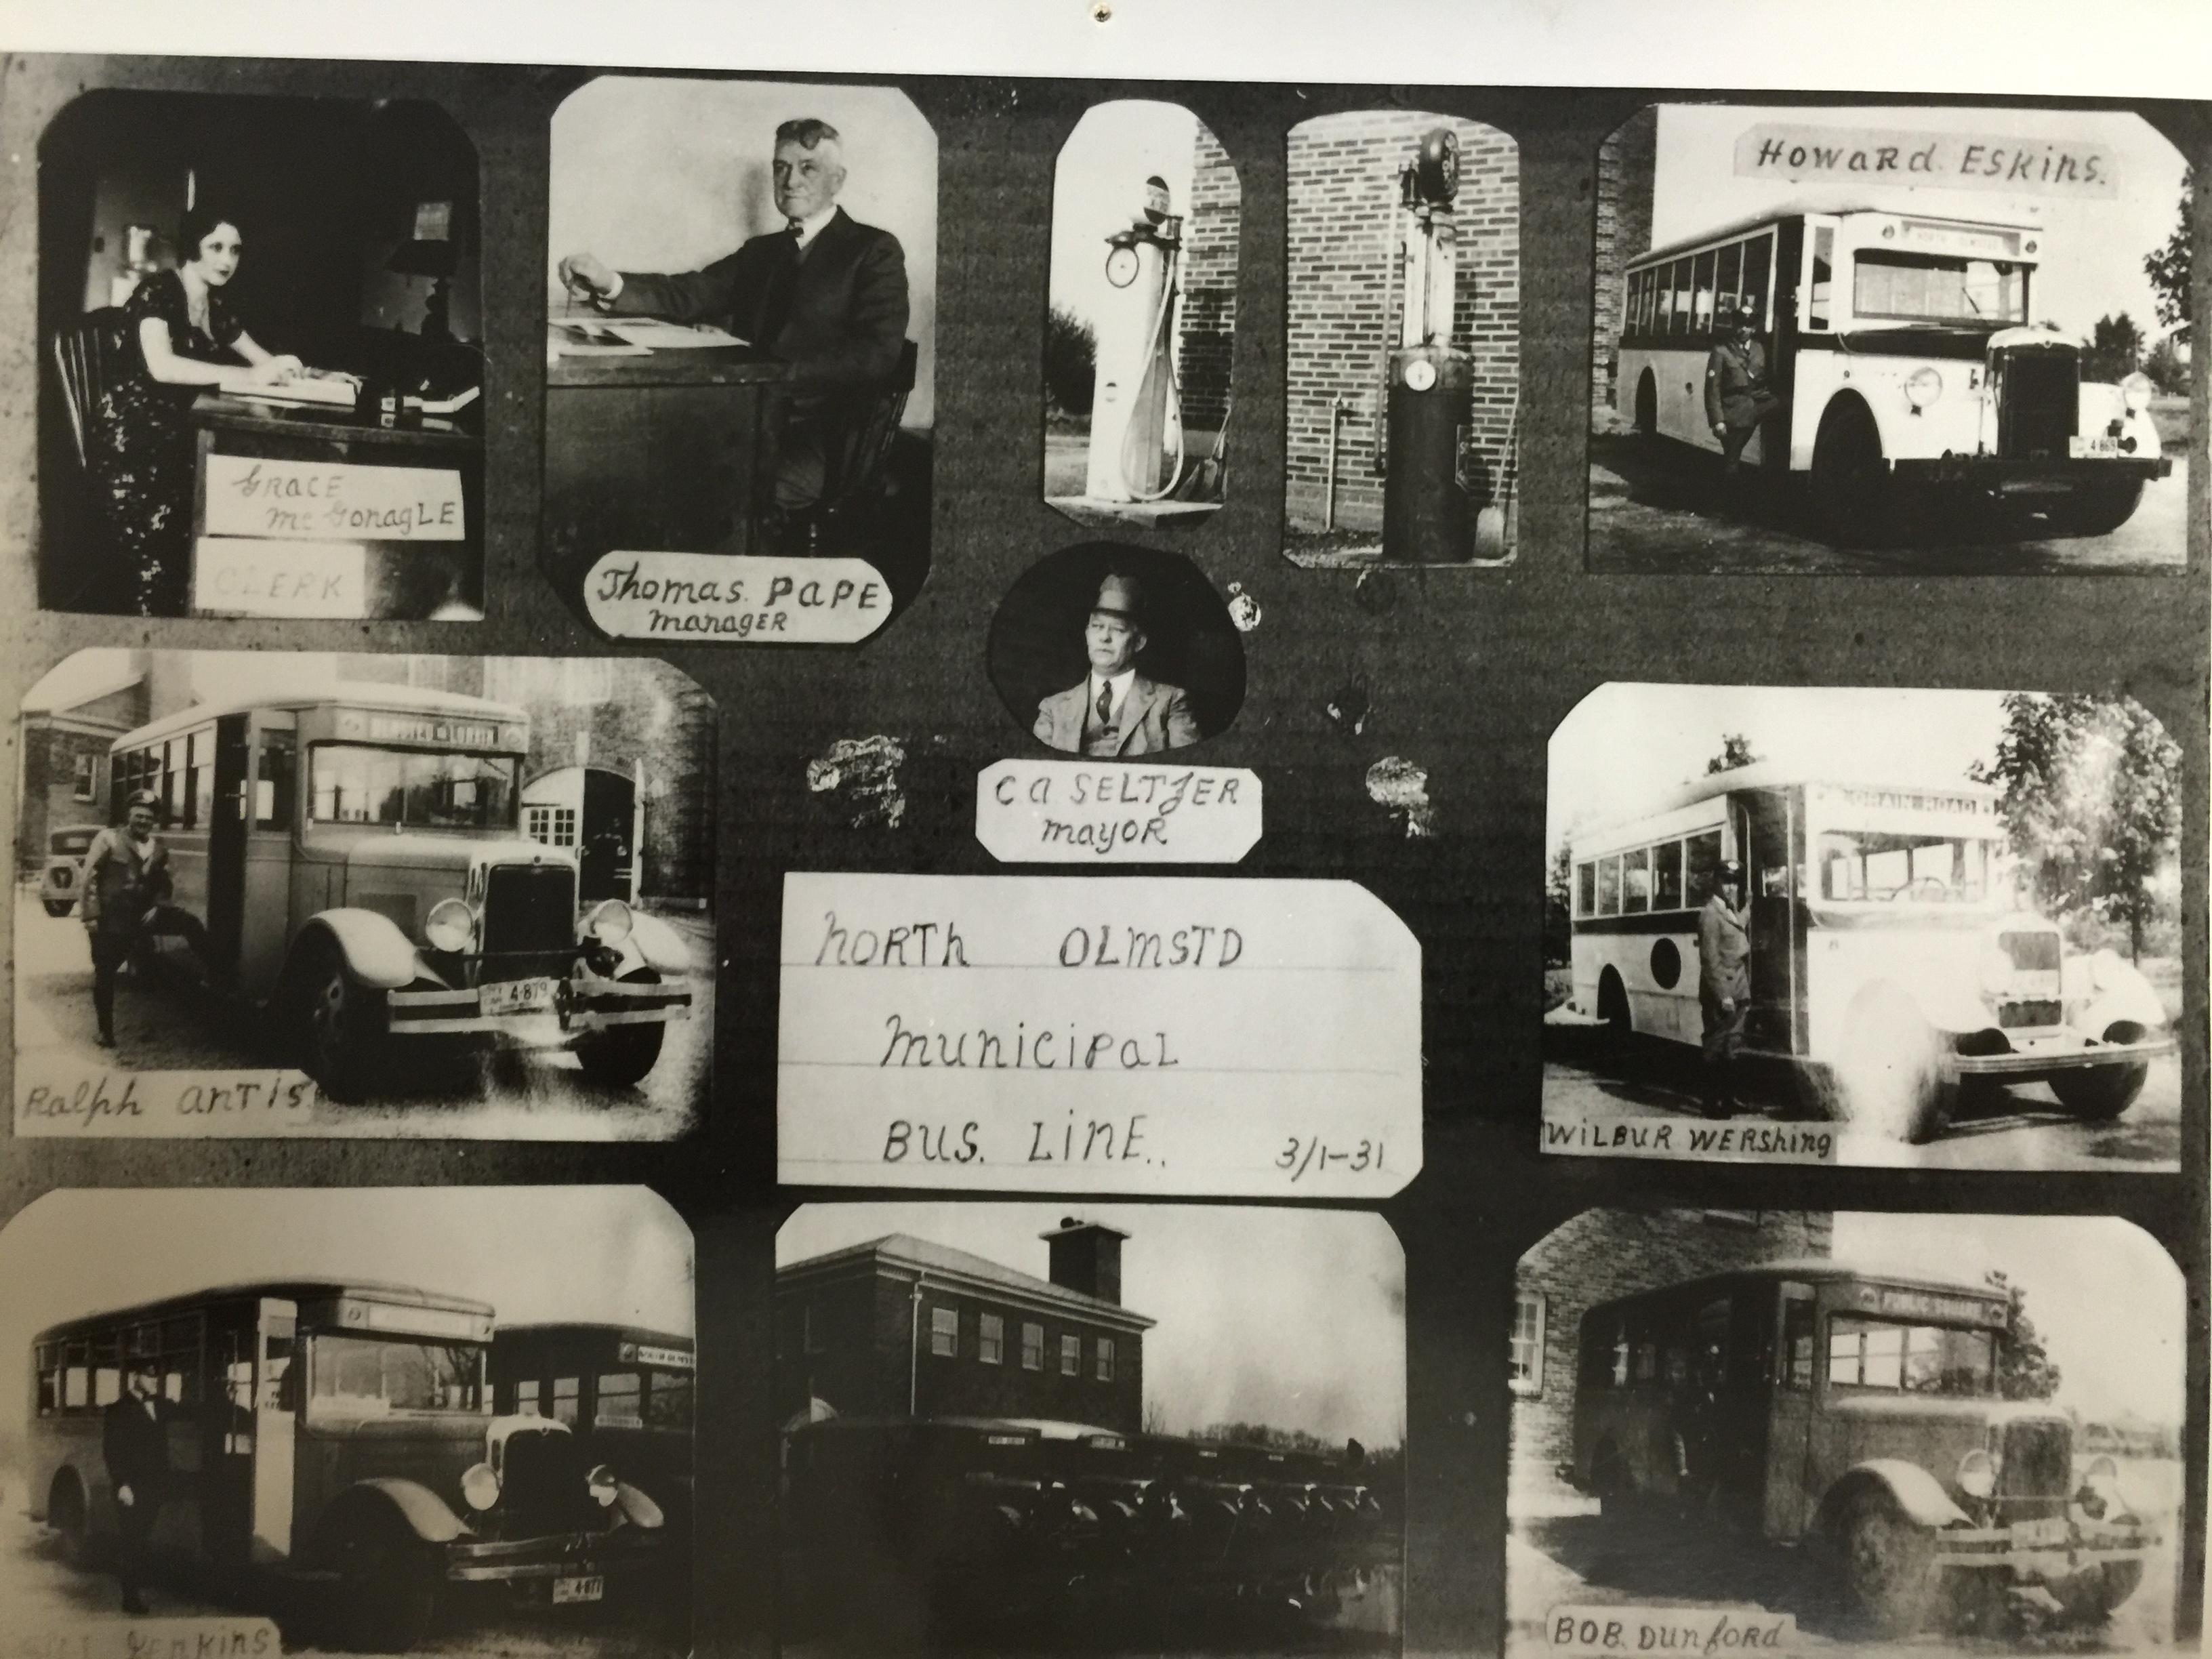 A collage of ten black and white images showing individuals and vehicles of the North Olmsted Municipal Bus Line during its first year of operation in 1931